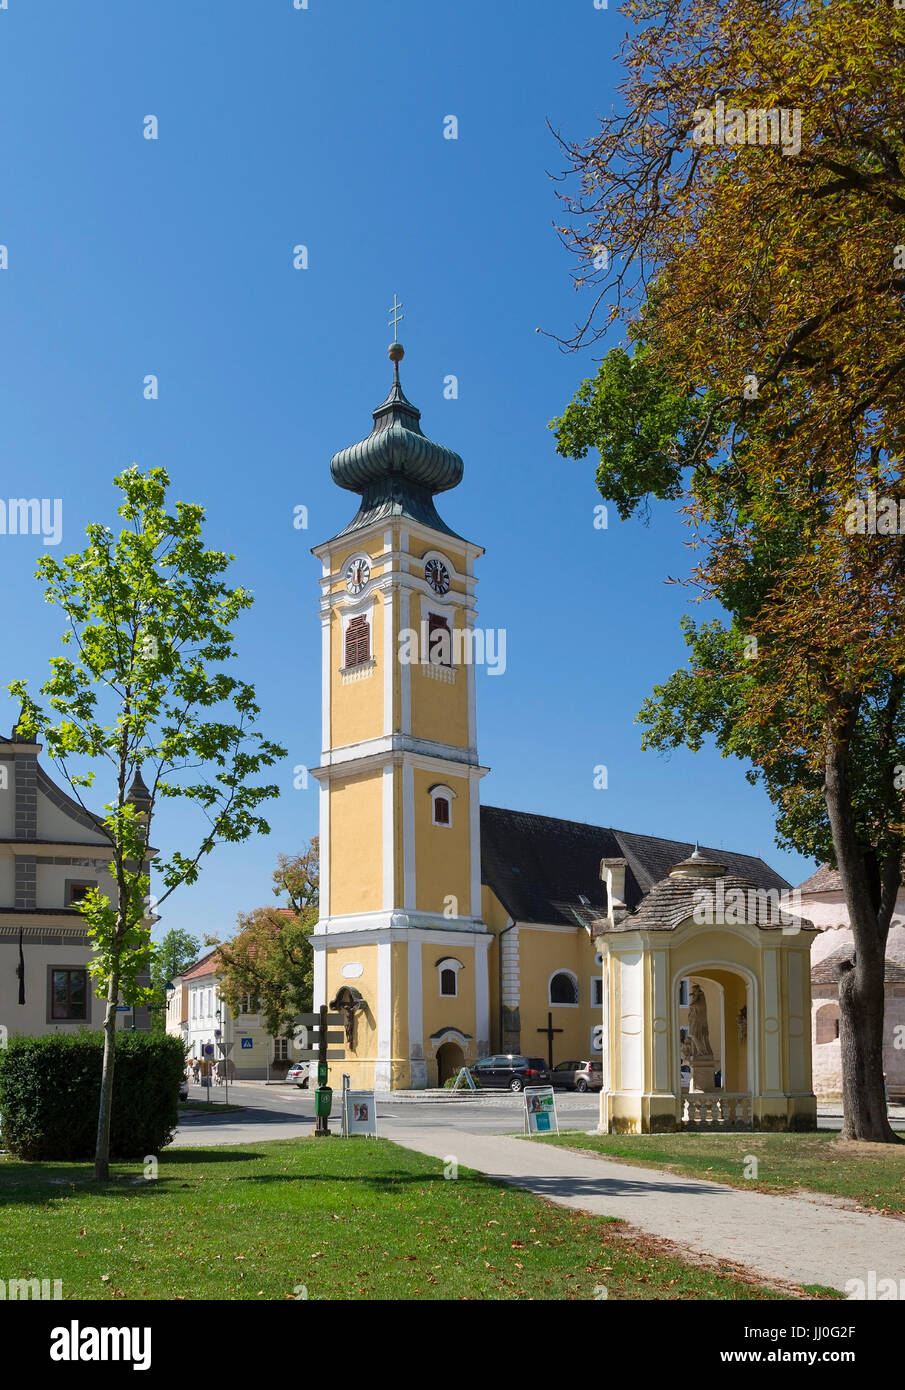 Church in quarrel village in the Kamp, forest quarter, Lower Austria, Austria - Church in quarrel village in the Kamp, forest quarter region, Lower Au Stock Photo